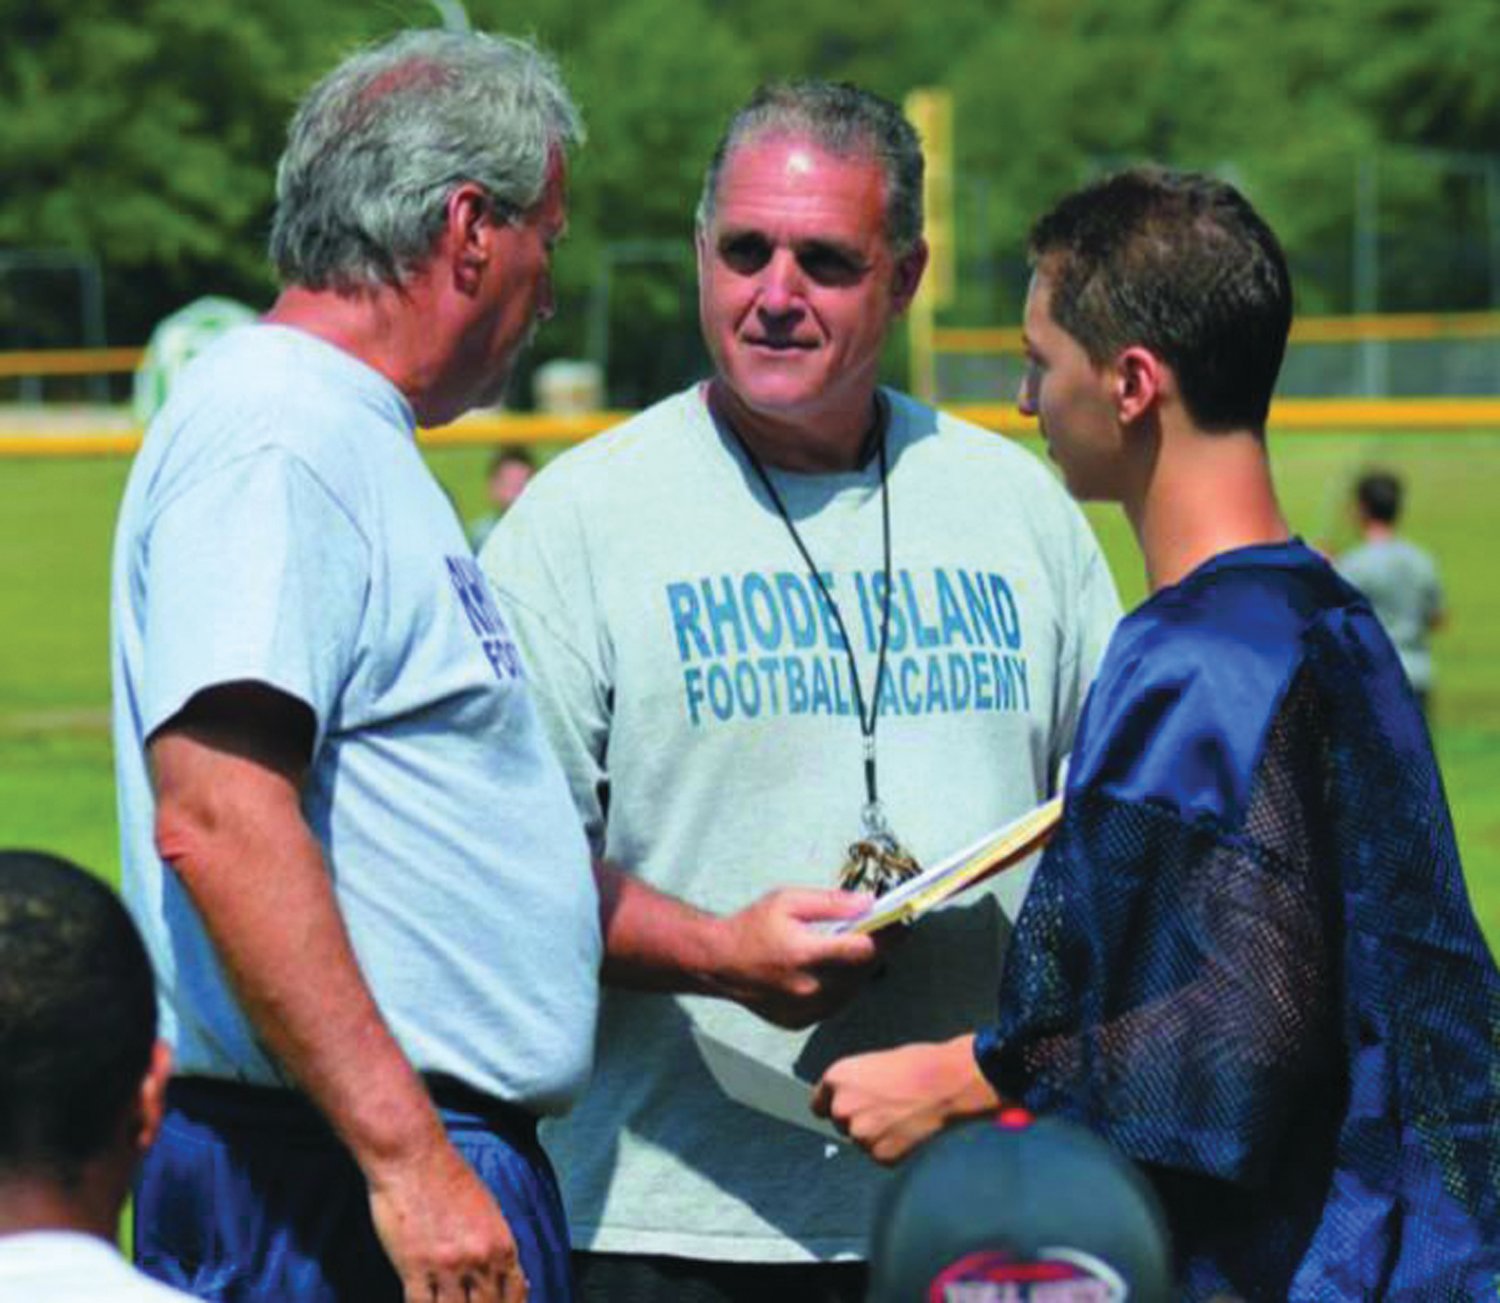 MAKING A DIFFERENCE: Tom Centore (center) while
working at the RI Football Academy.